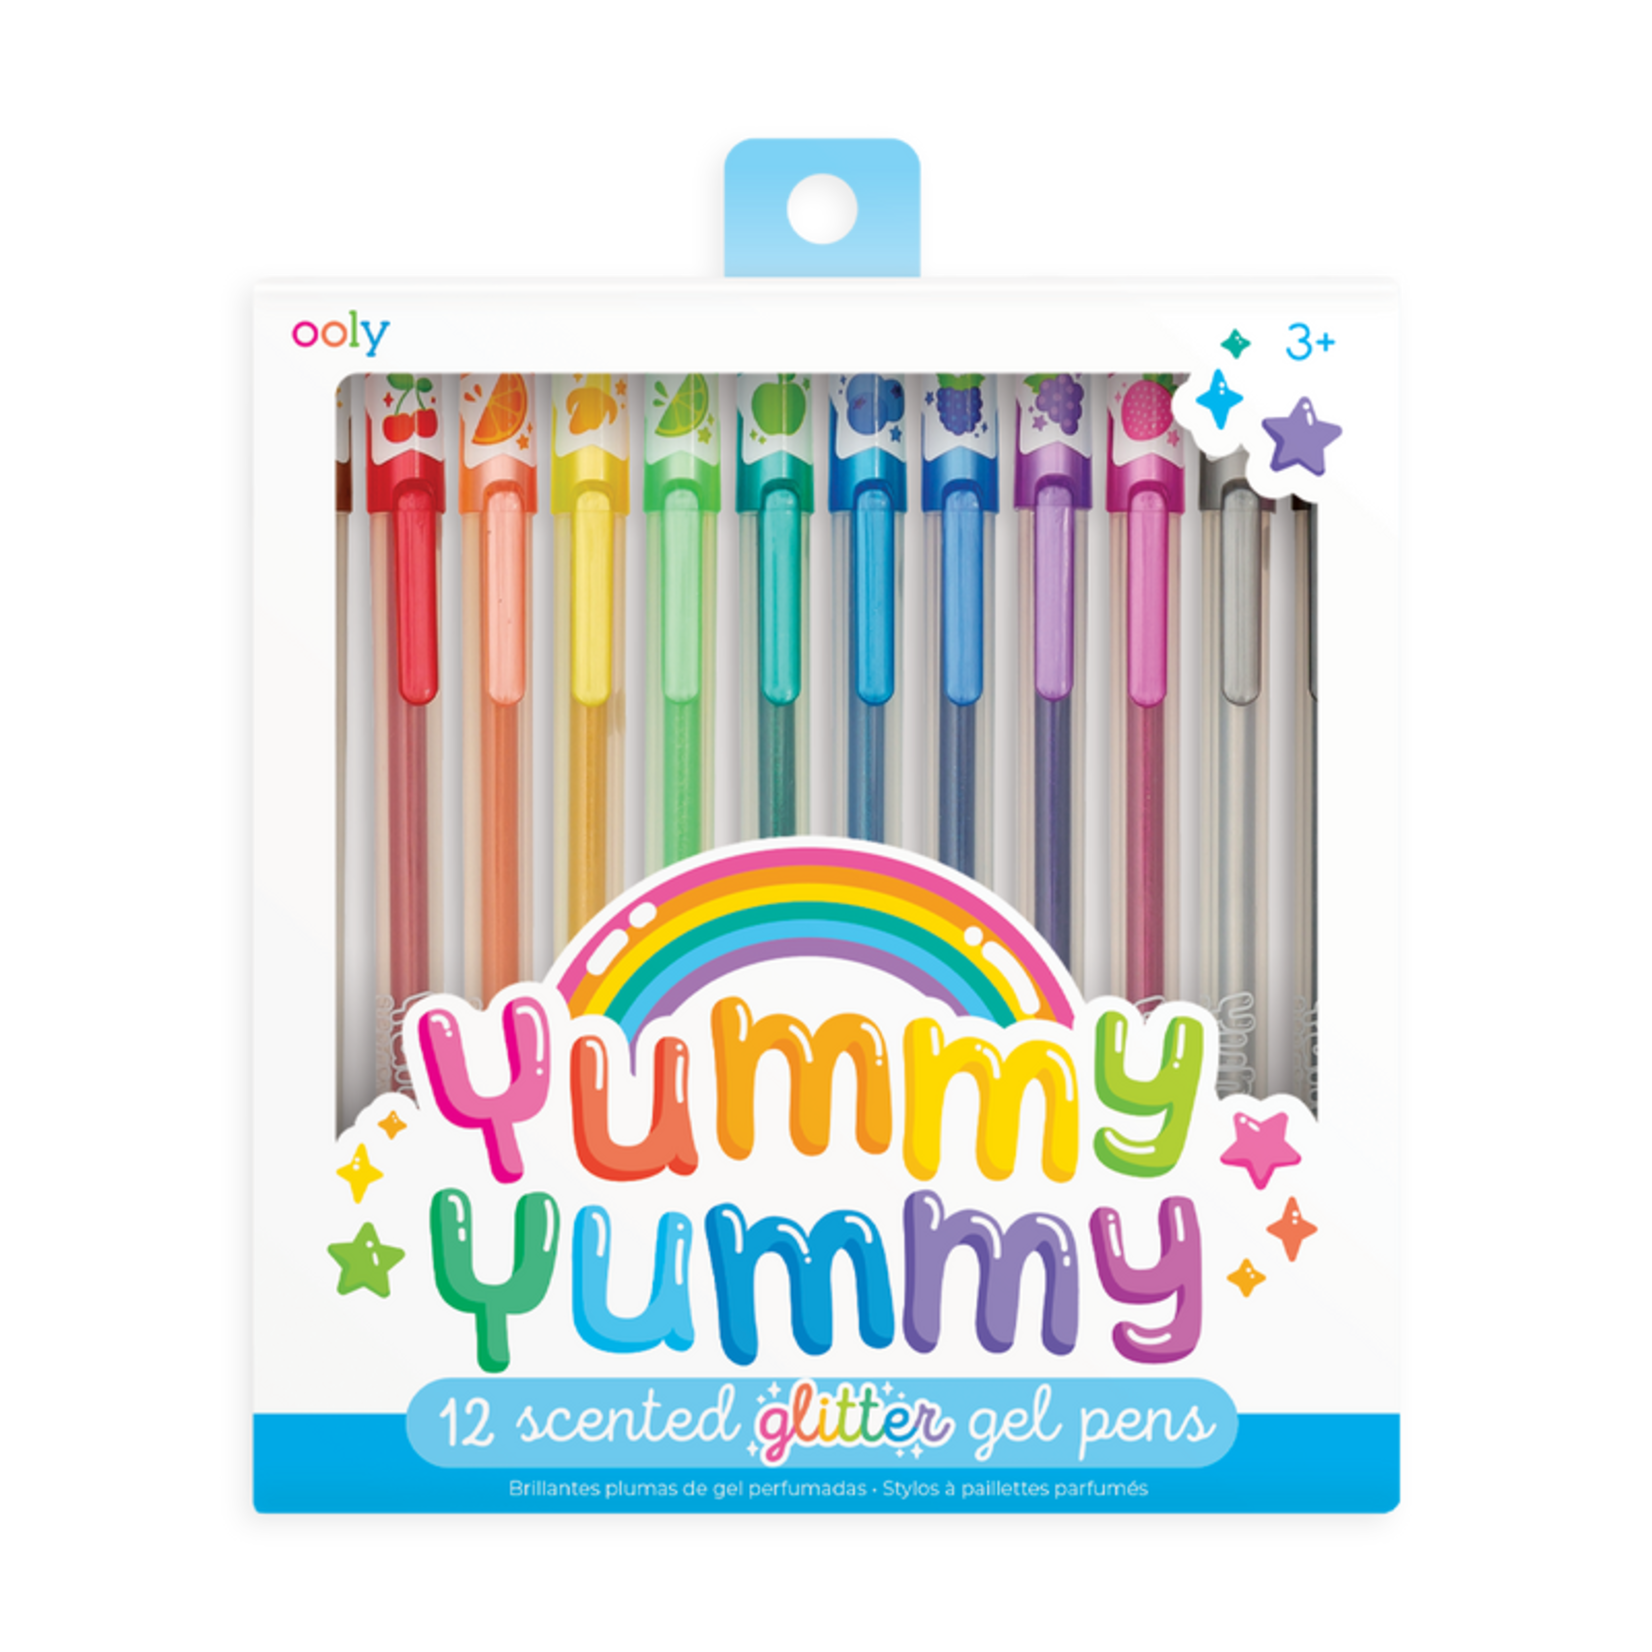 ooly Yummy Yummy Scented Glitter Gel Pens 2.0 - Set of 12